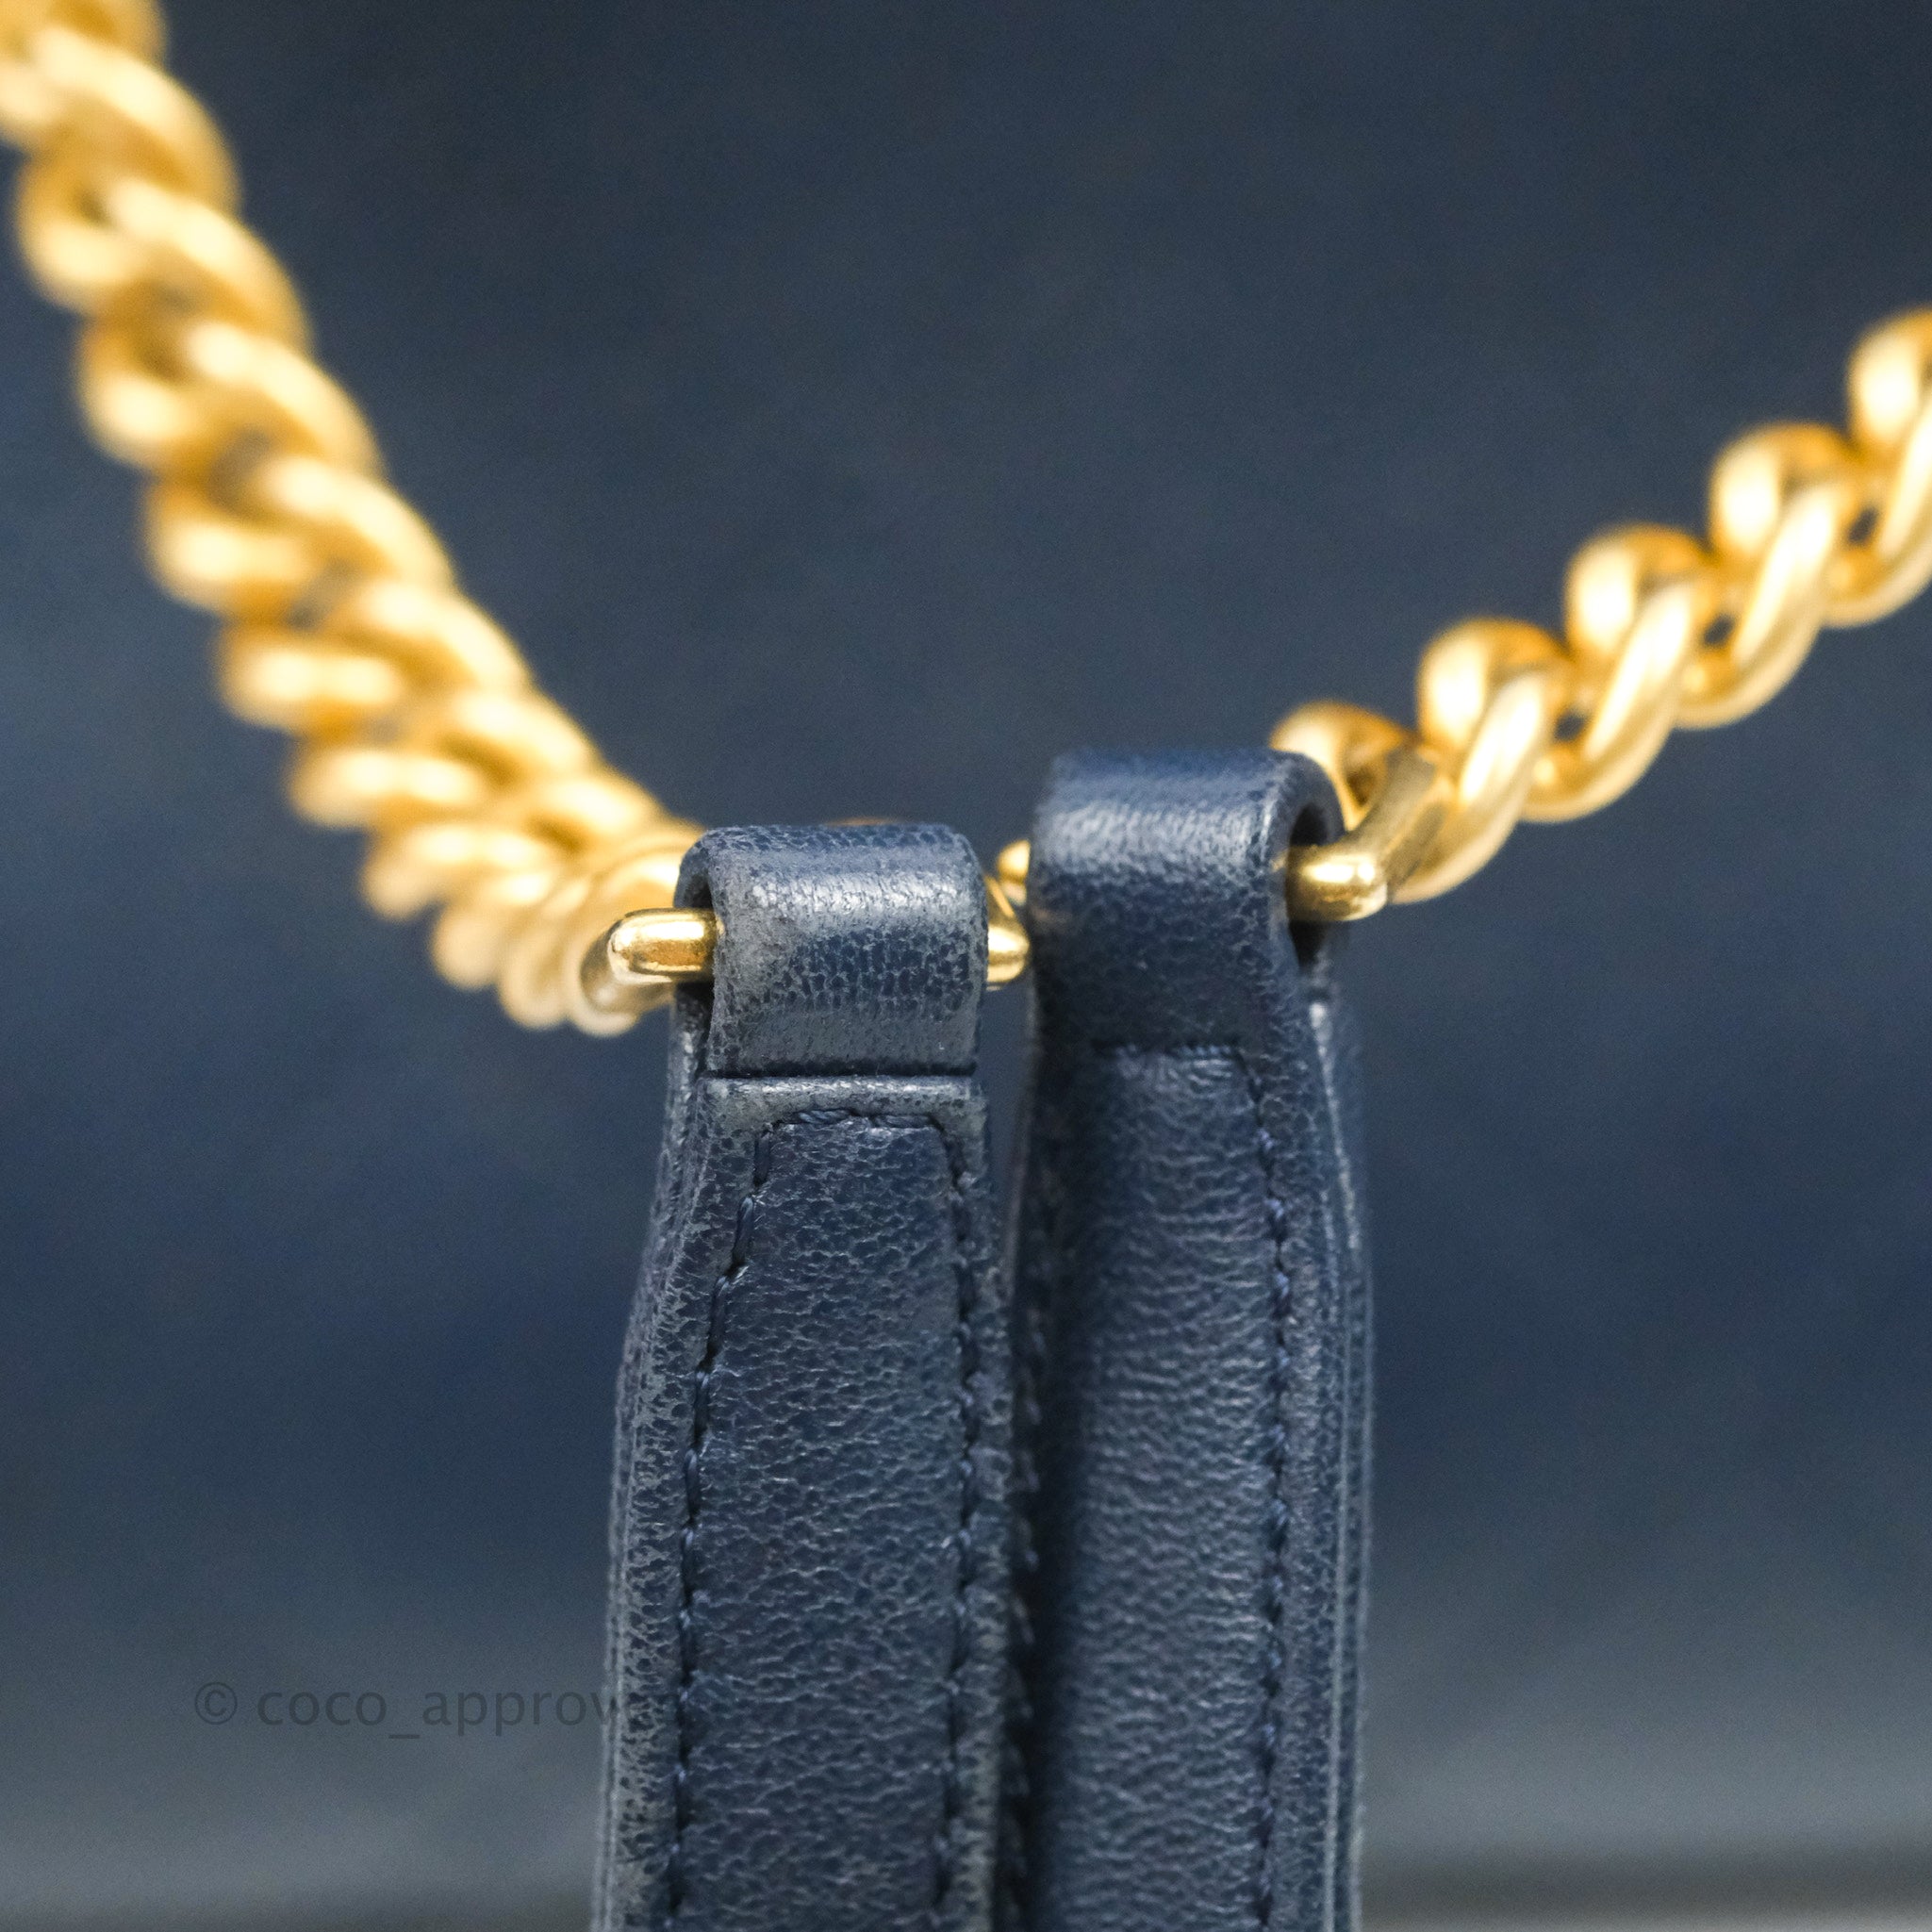 Chanel Flat Quilted Coco Luxe Large Shopping Bag Navy Aged Gold